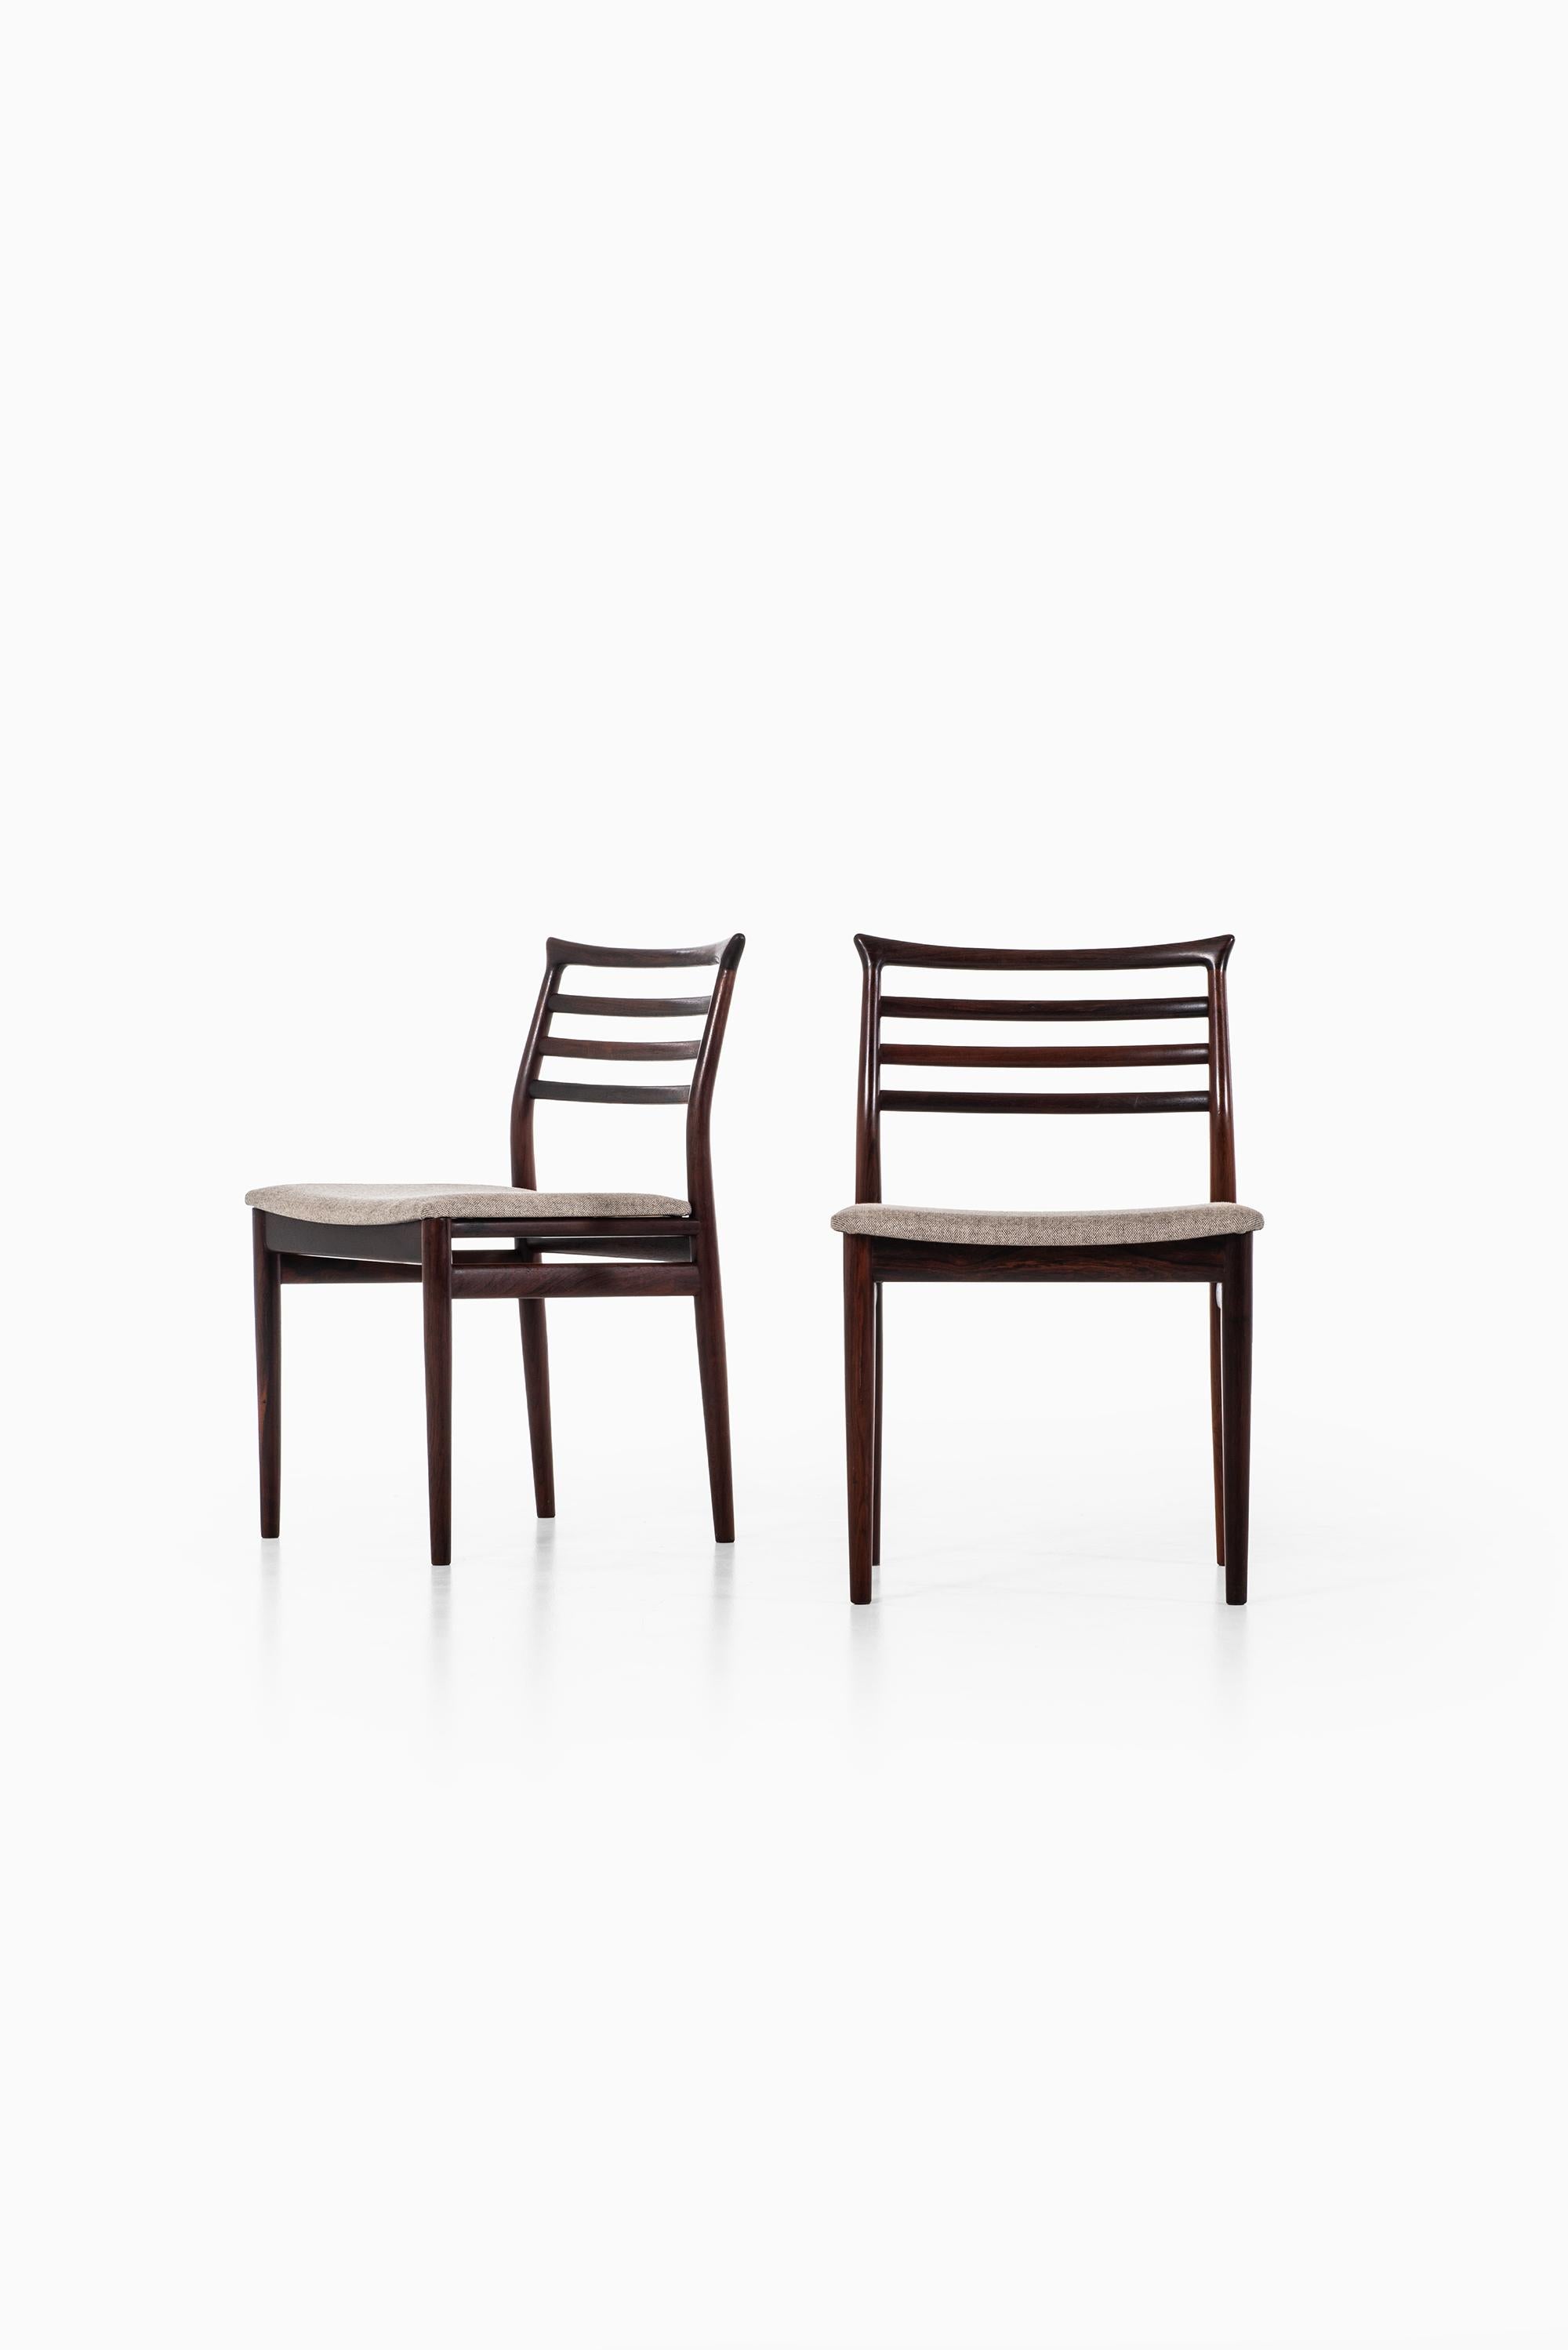 Rare set of 8 dining chairs designed by Erling Torvits. Produced by Sorø stolefabrik in Denmark.